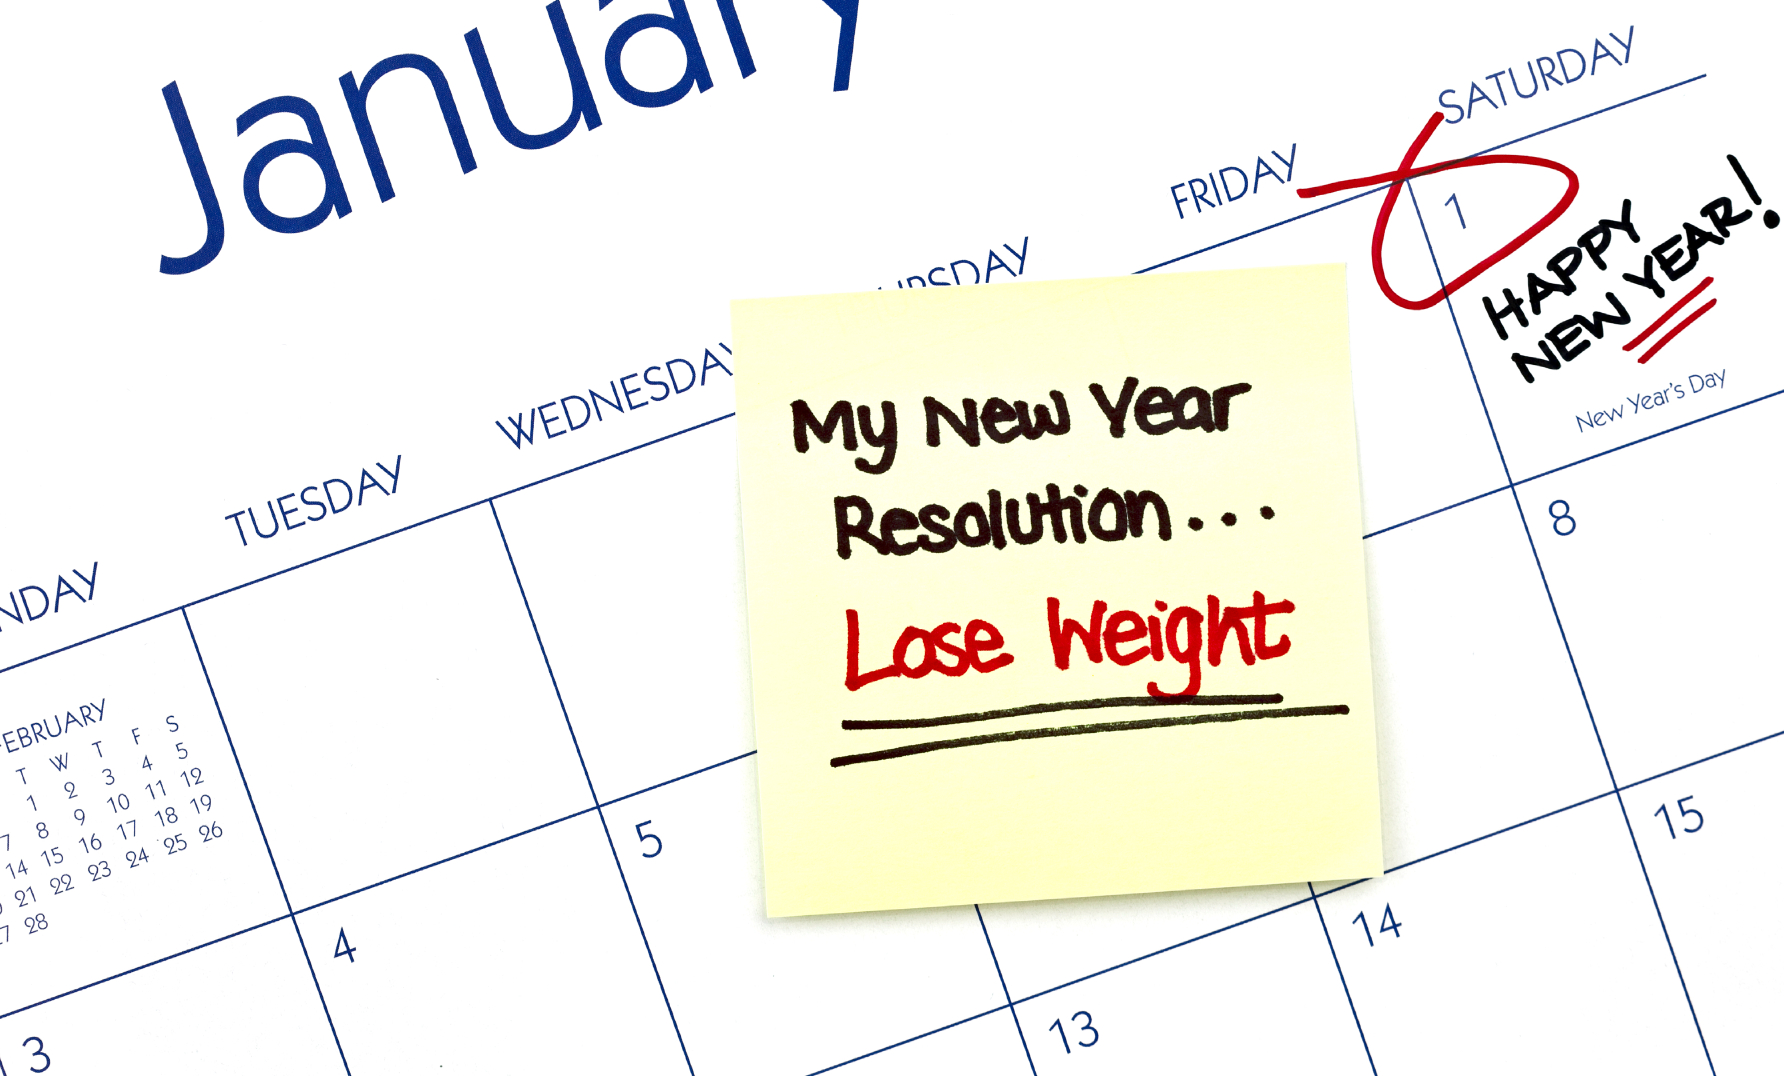 Top 5 New Year's Resolutions in the Middle East for 2013